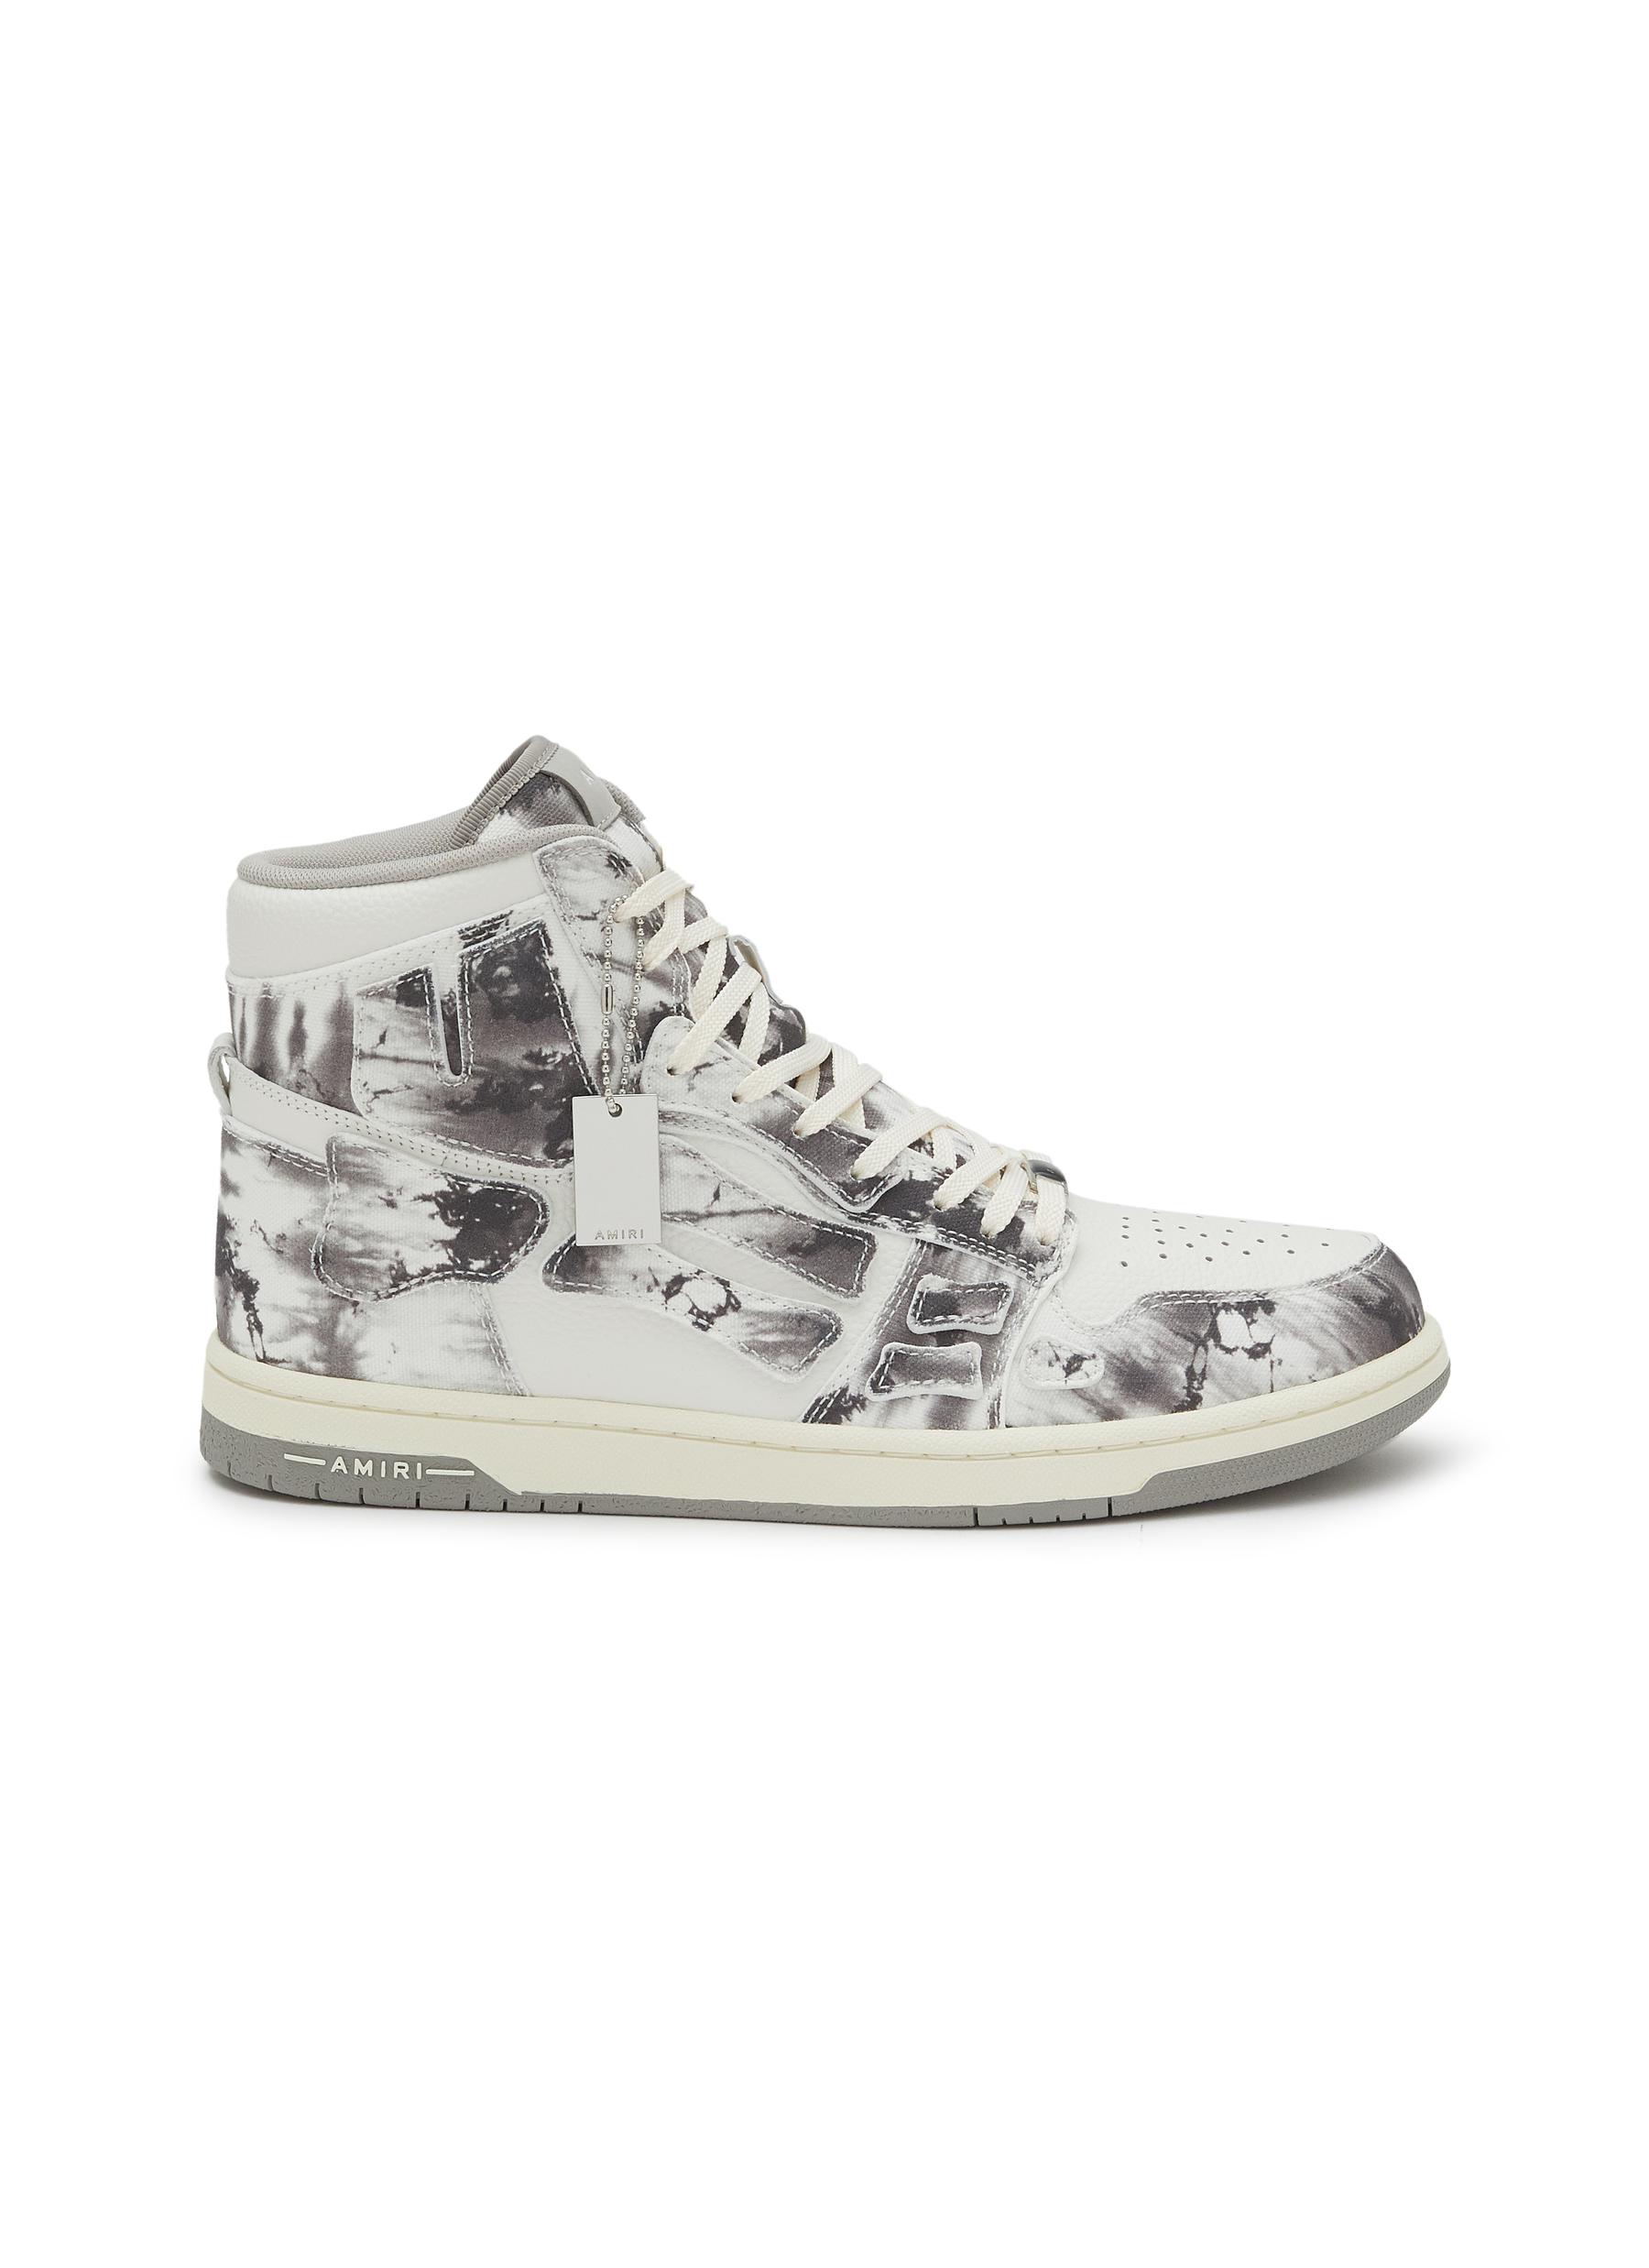 AMIRI ‘Skel' High Top Lace Up Leather Sneakers